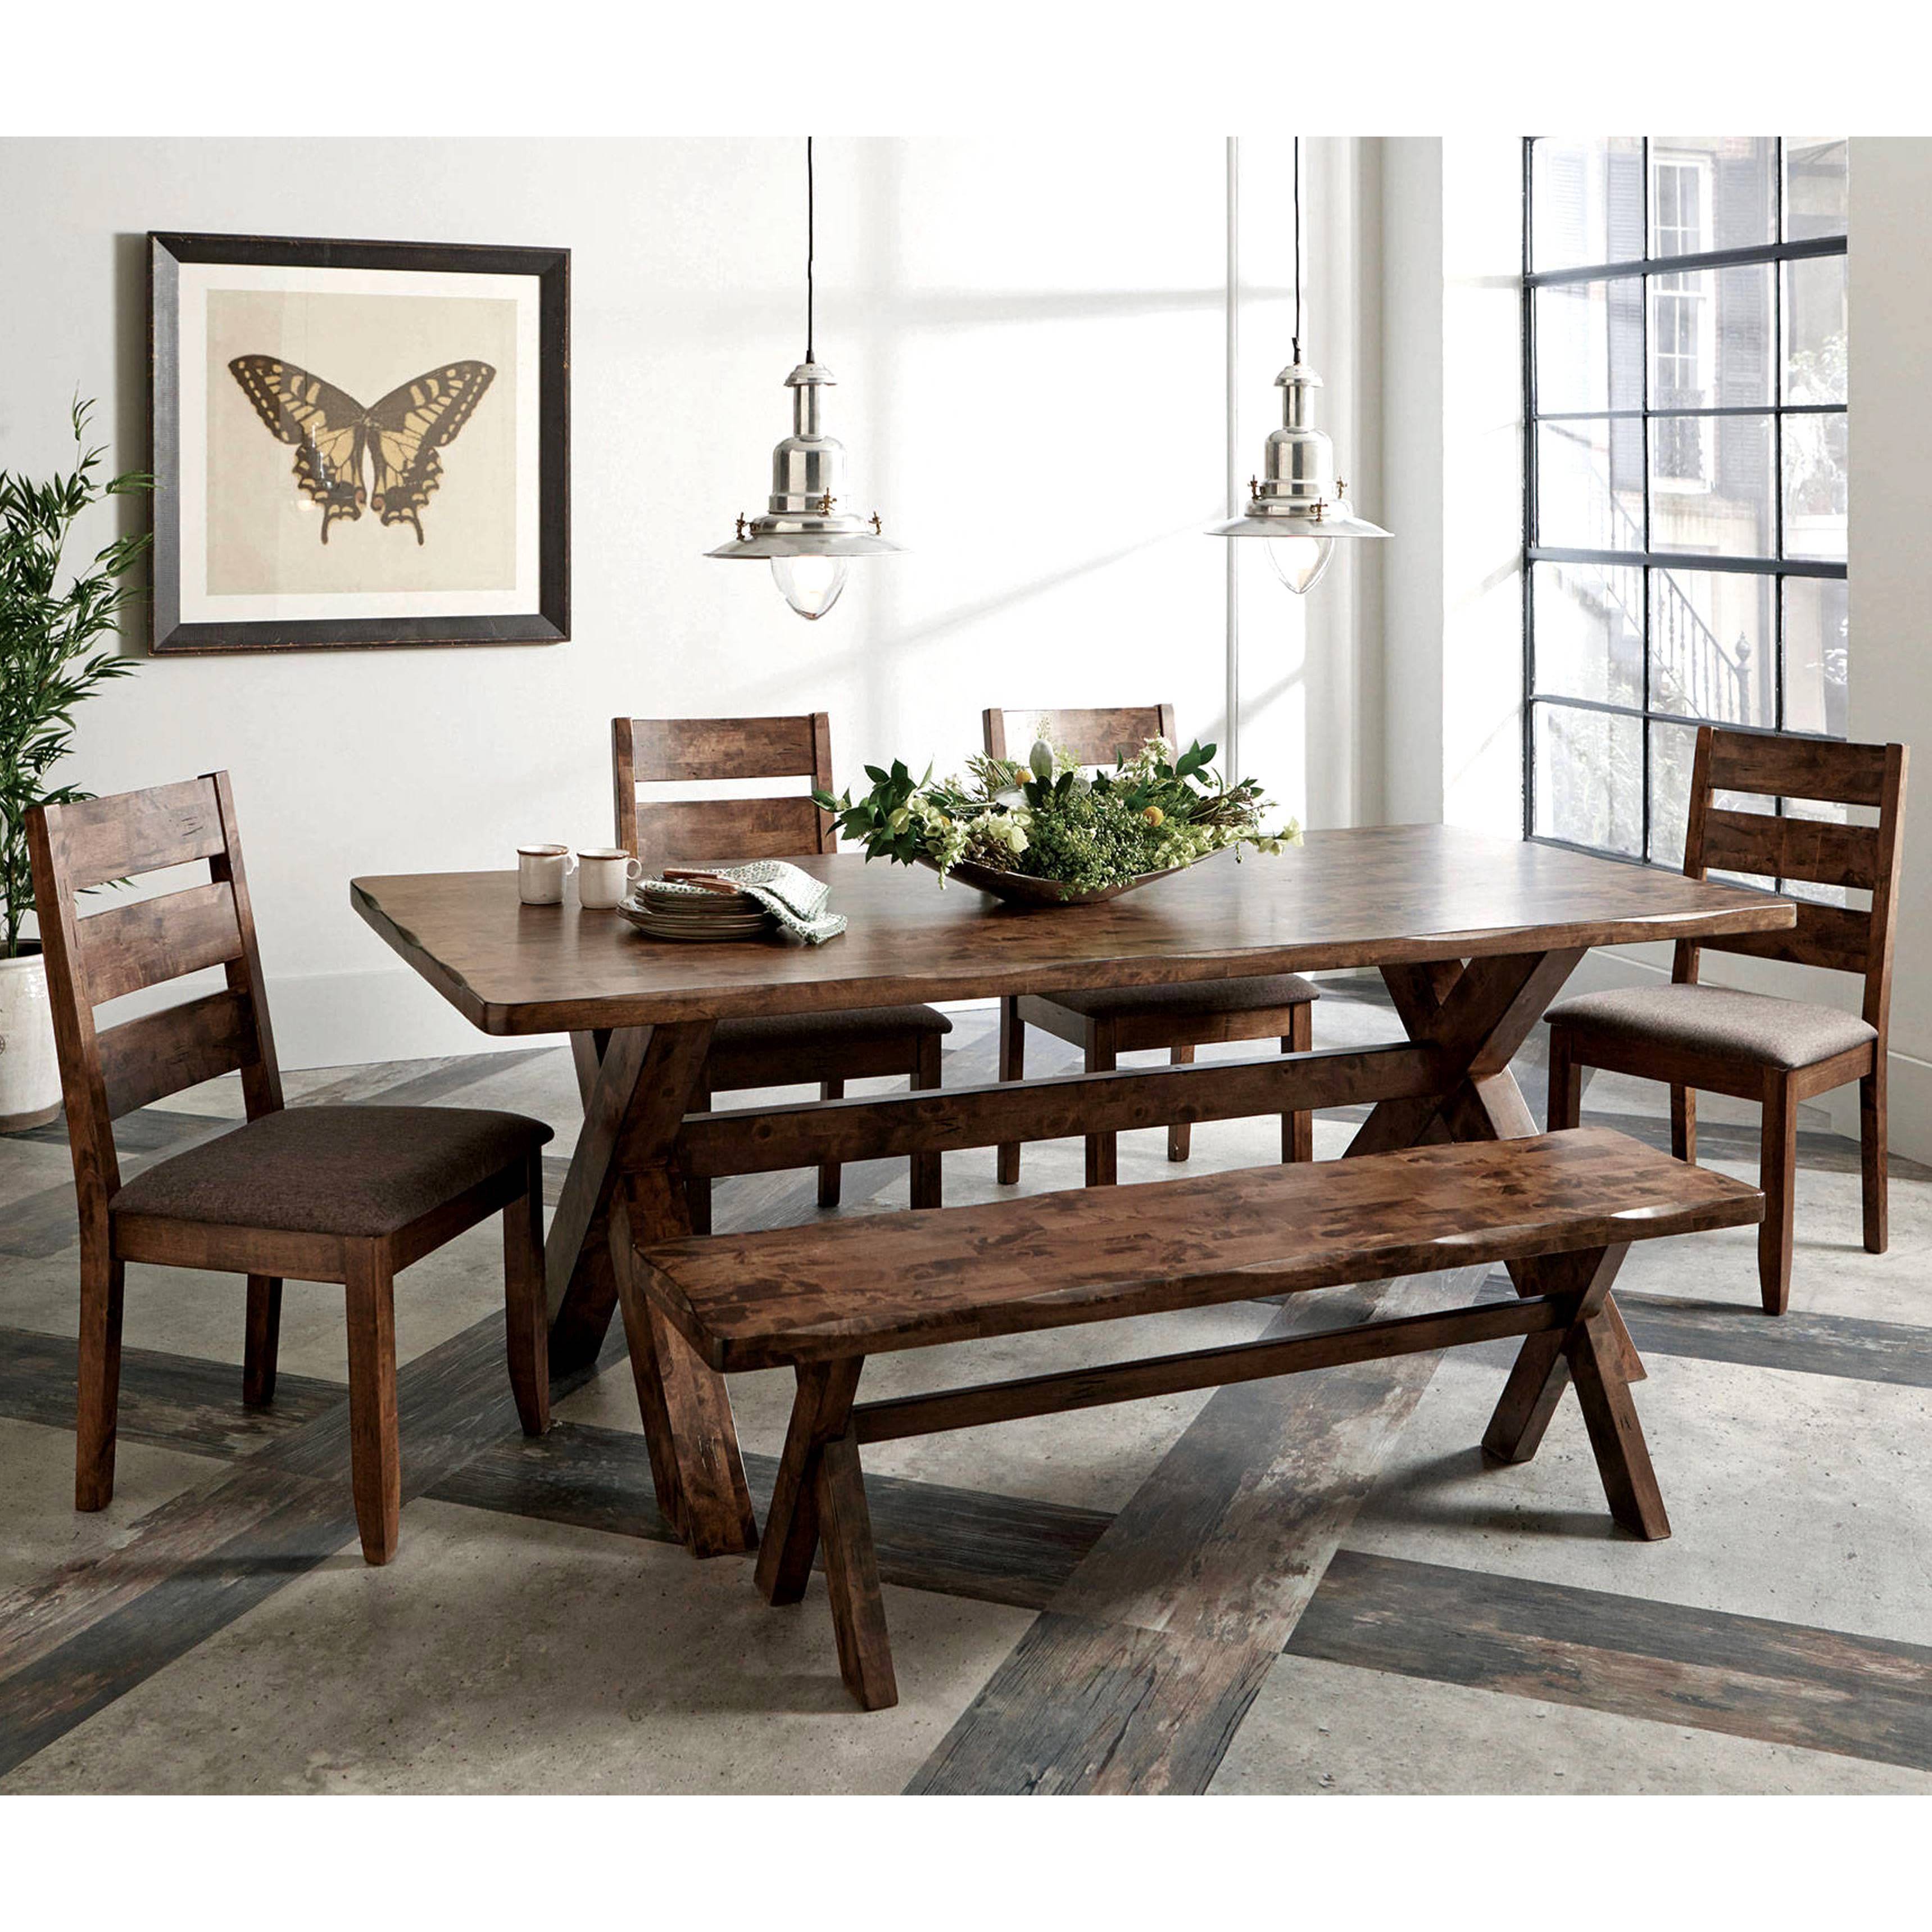 Rustic Knotty Burl Designed Country Style Dining Set Overstock 16280418